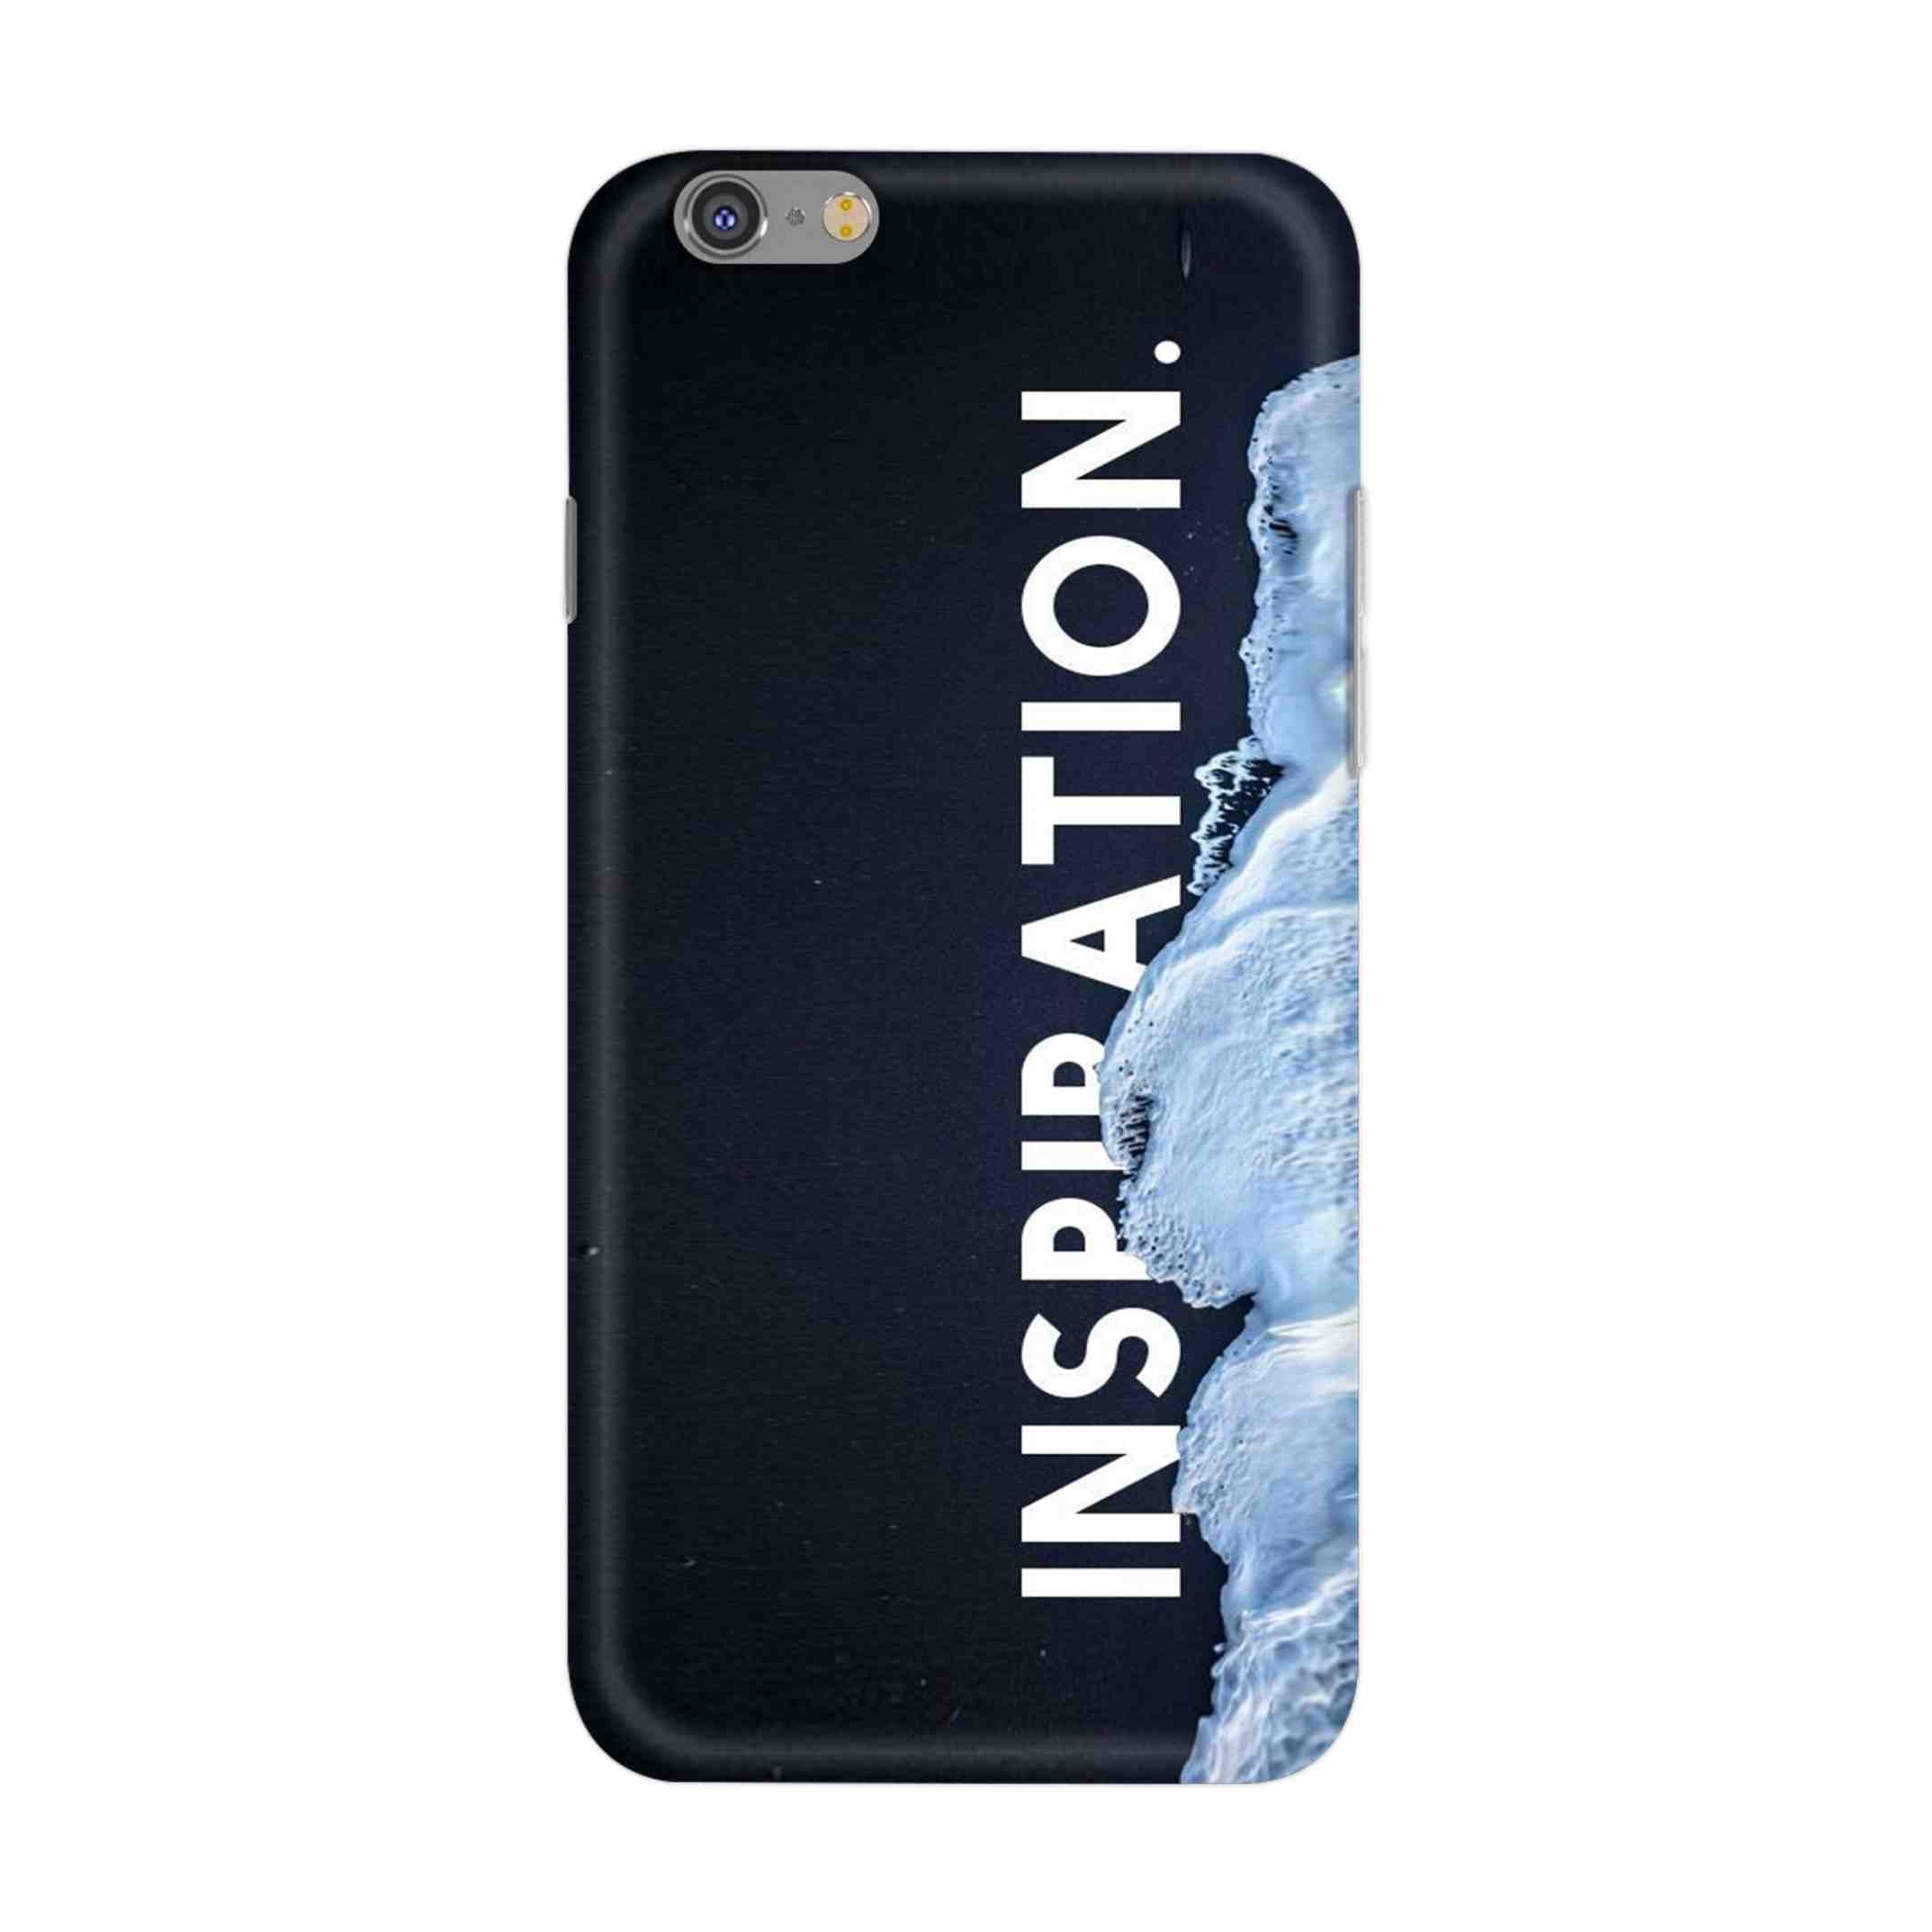 Buy Inspiration Hard Back Mobile Phone Case/Cover For iPhone 6 Plus / 6s Plus Online